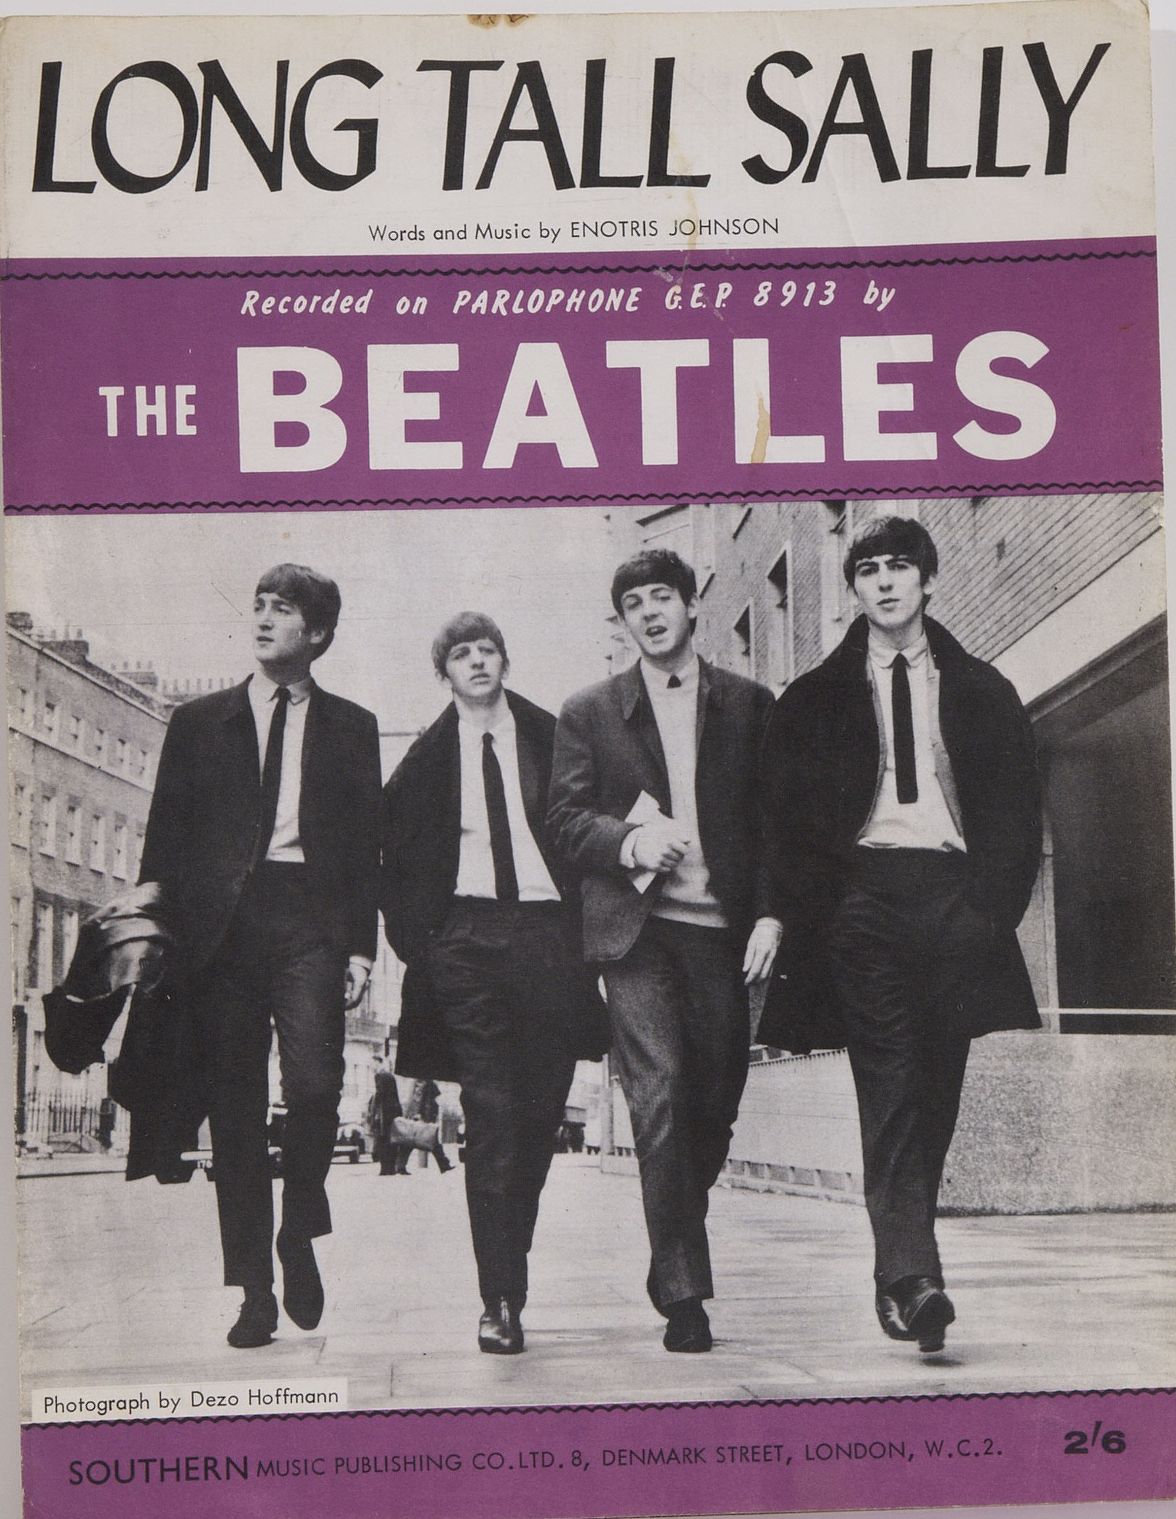 Long Tall Sally by The Beatles. The in-depth story behind the